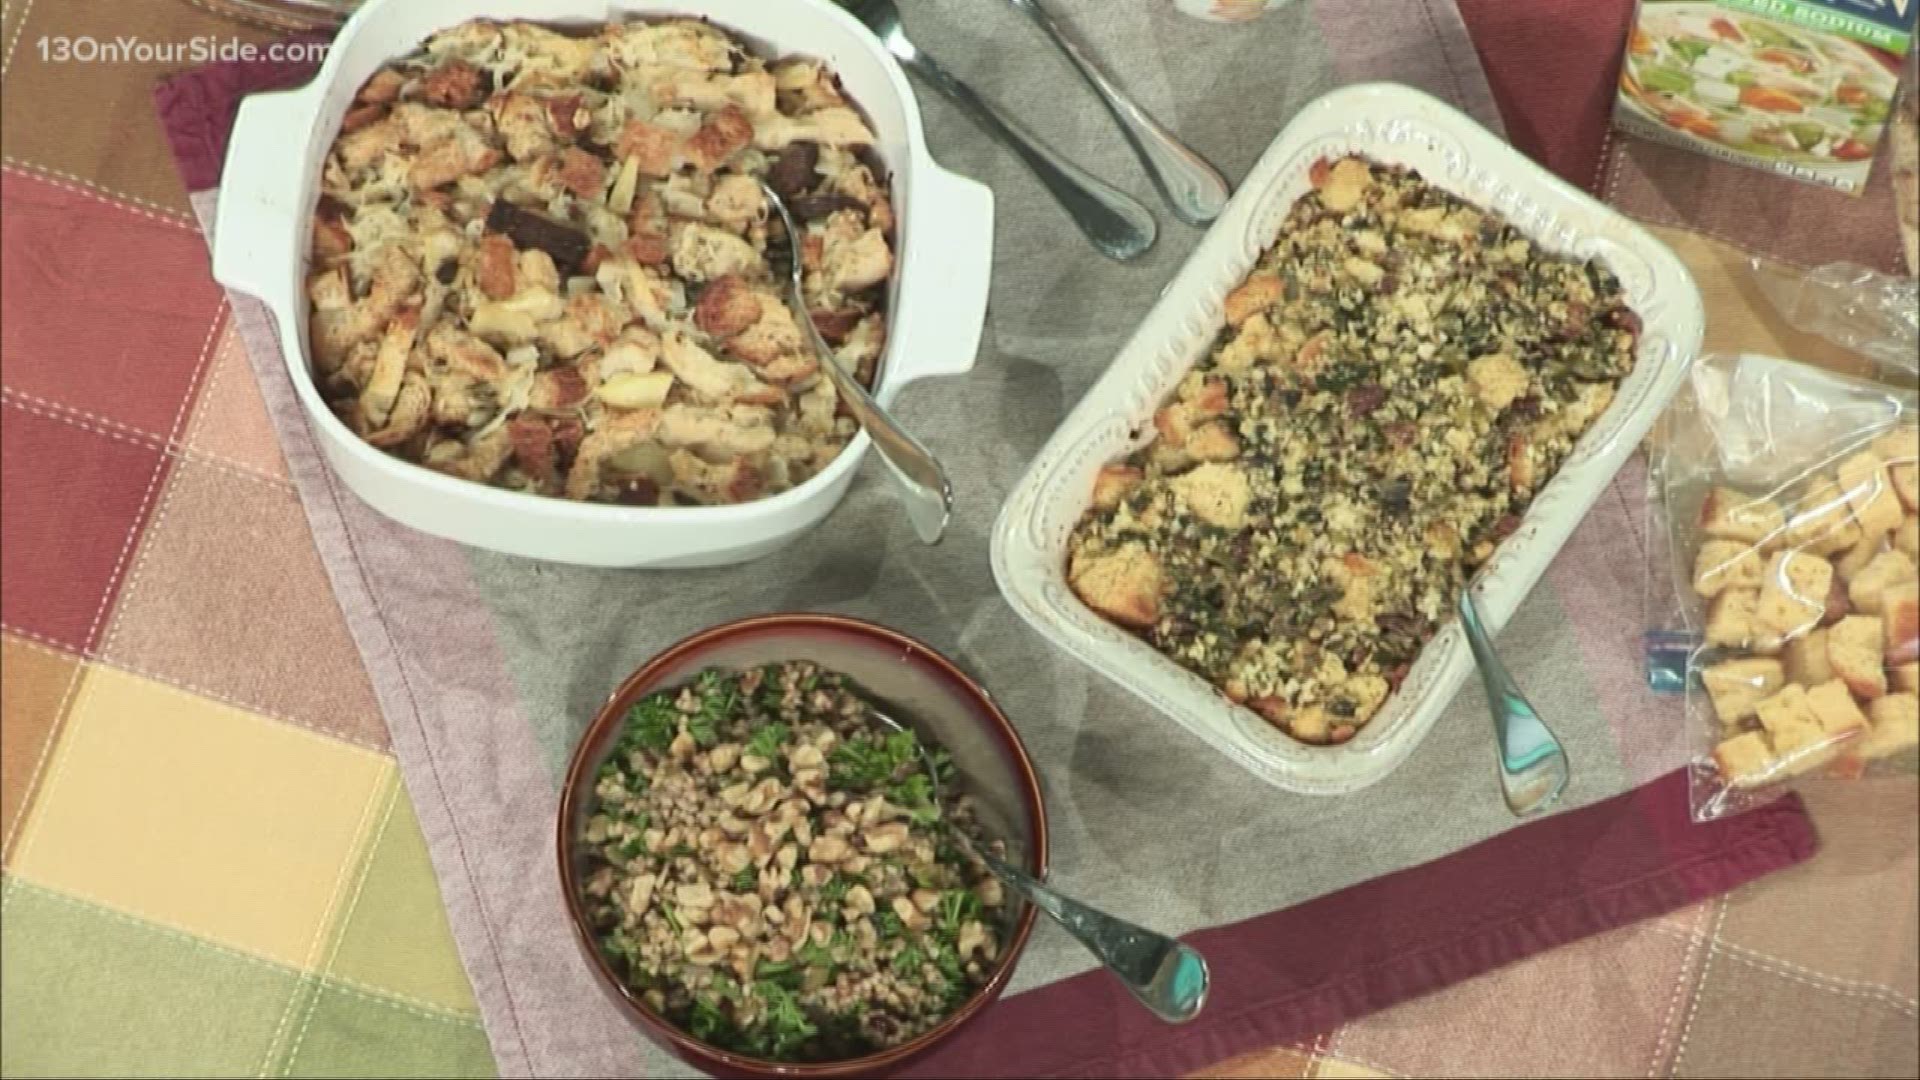 In this On The Menu segment, Sara Nychypor, RDN looks at some healthier options this Thanksgiving.